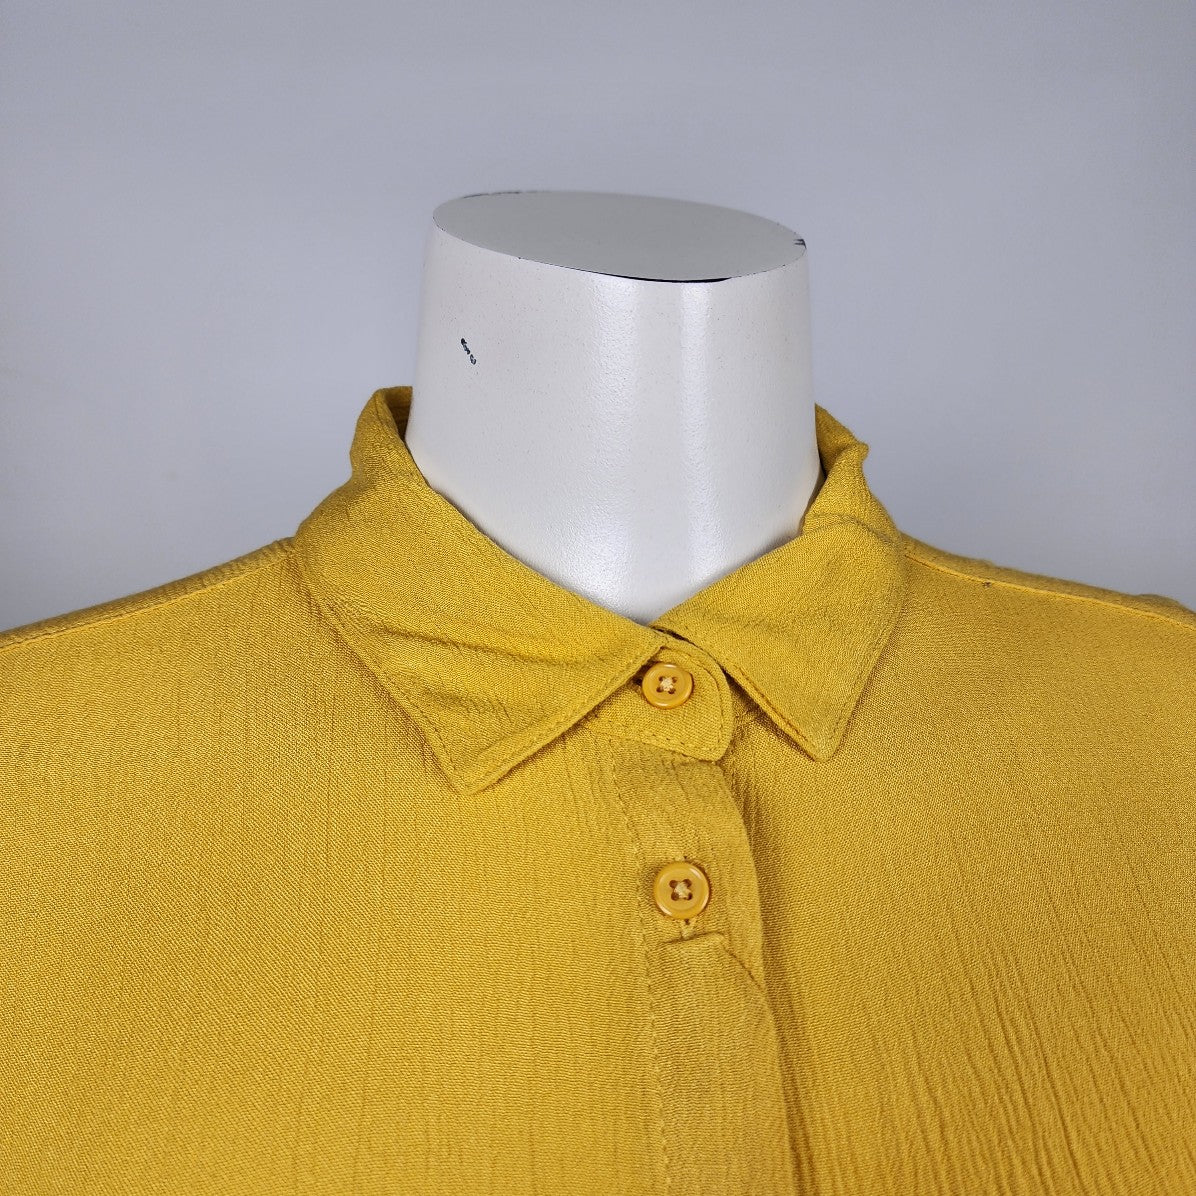 Ichi Yellow Button Up Collared Blouse Top Size S